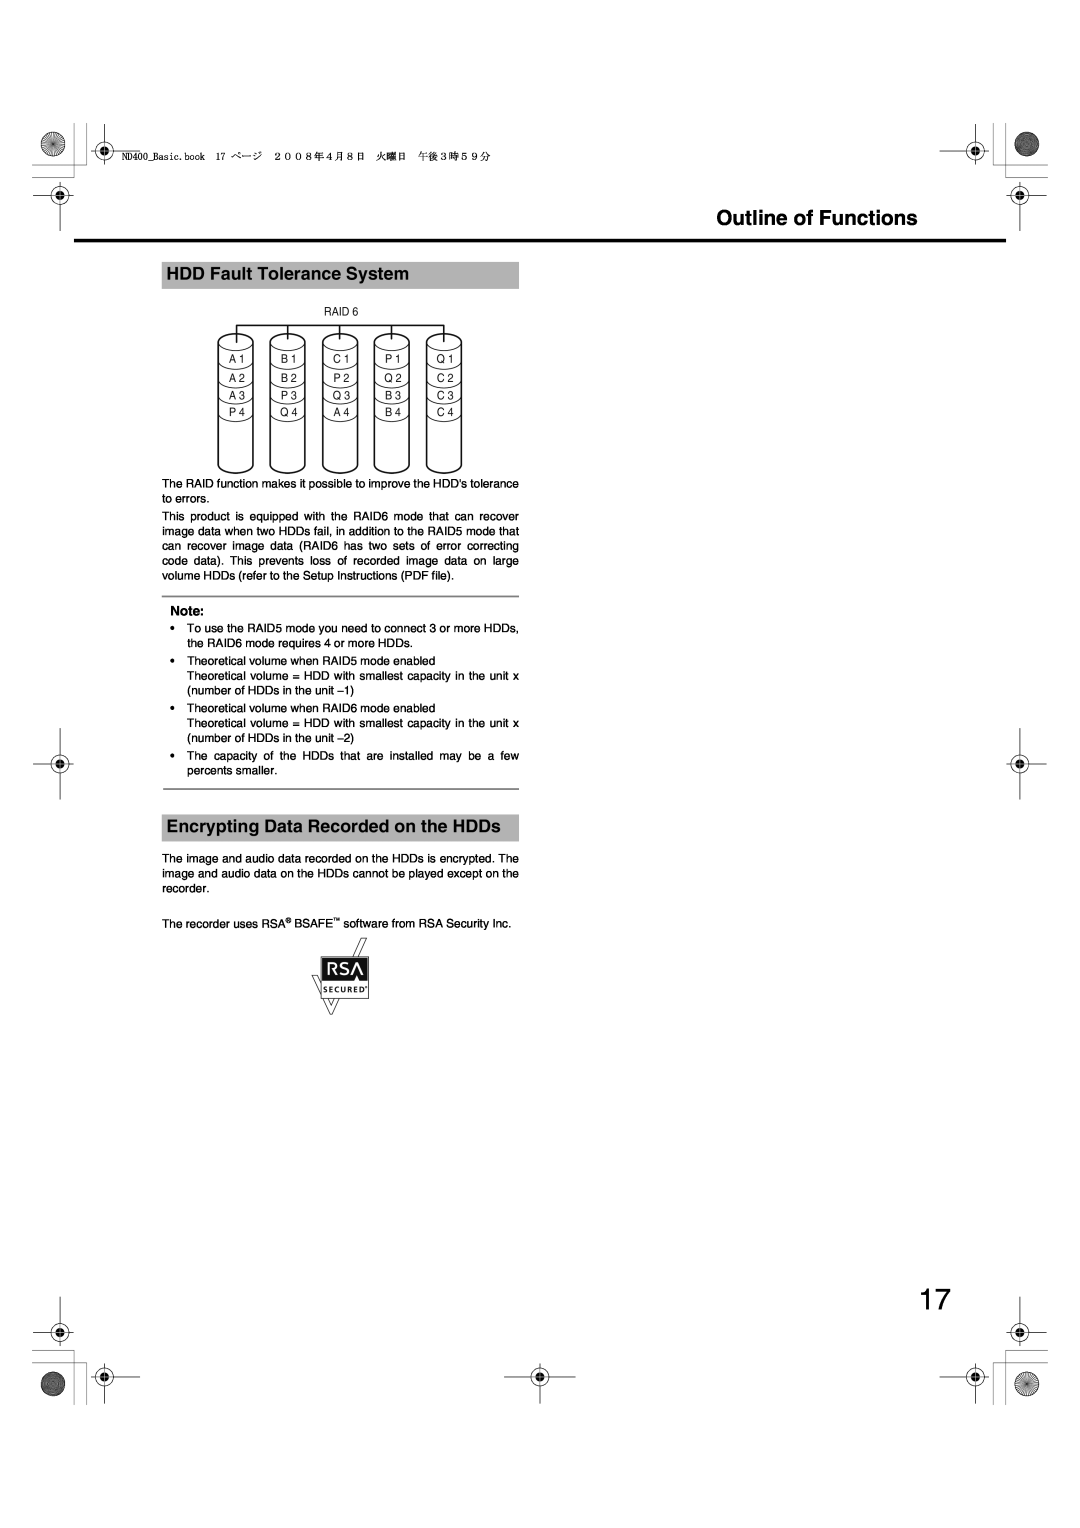 Panasonic WJ-ND400 manual Outline of Functions, HDD Fault Tolerance System, Encrypting Data Recorded on the HDDs, Raid 